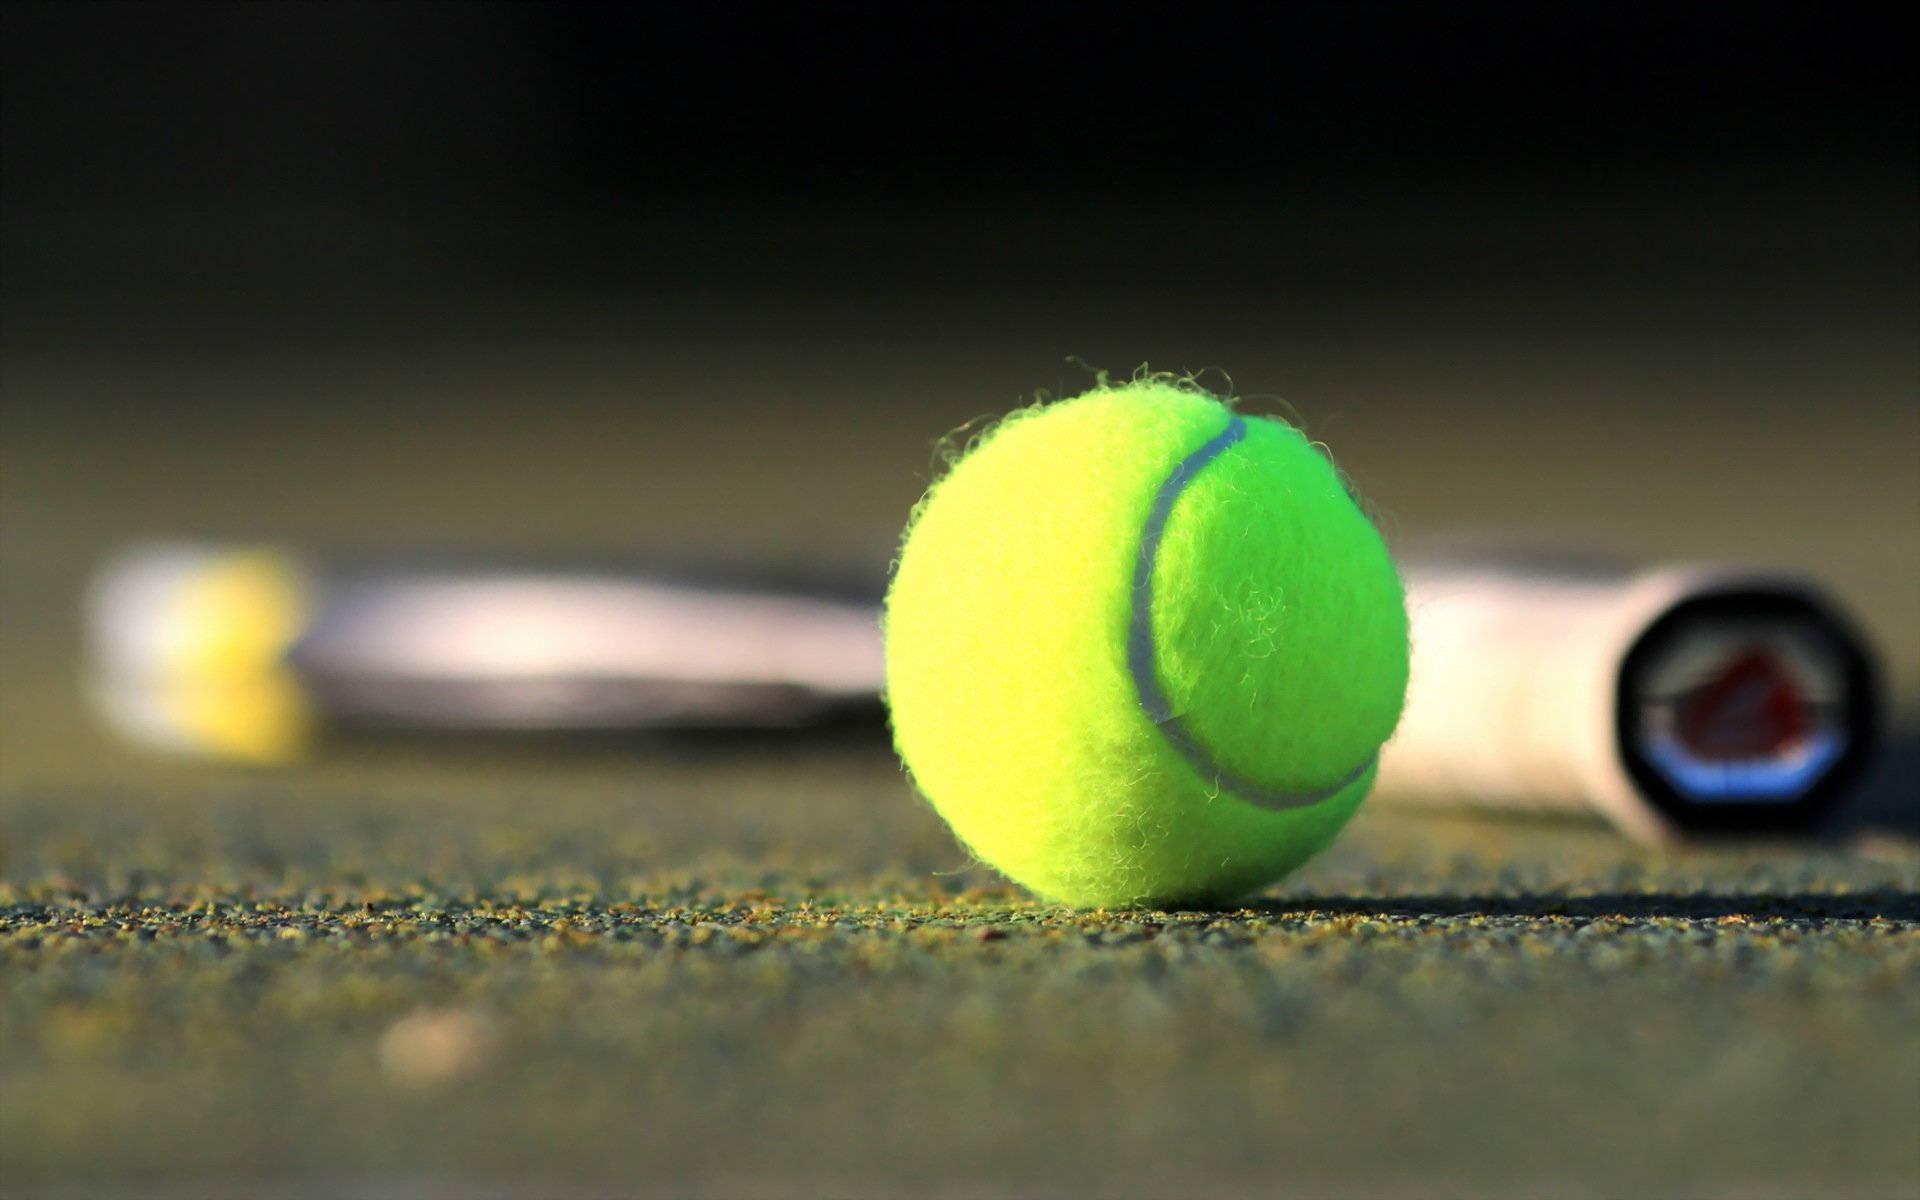 Wimbledongrön Tennisboll (assuming The Phrase Is Meant To Be The Name Of A Wallpaper Image) Wallpaper